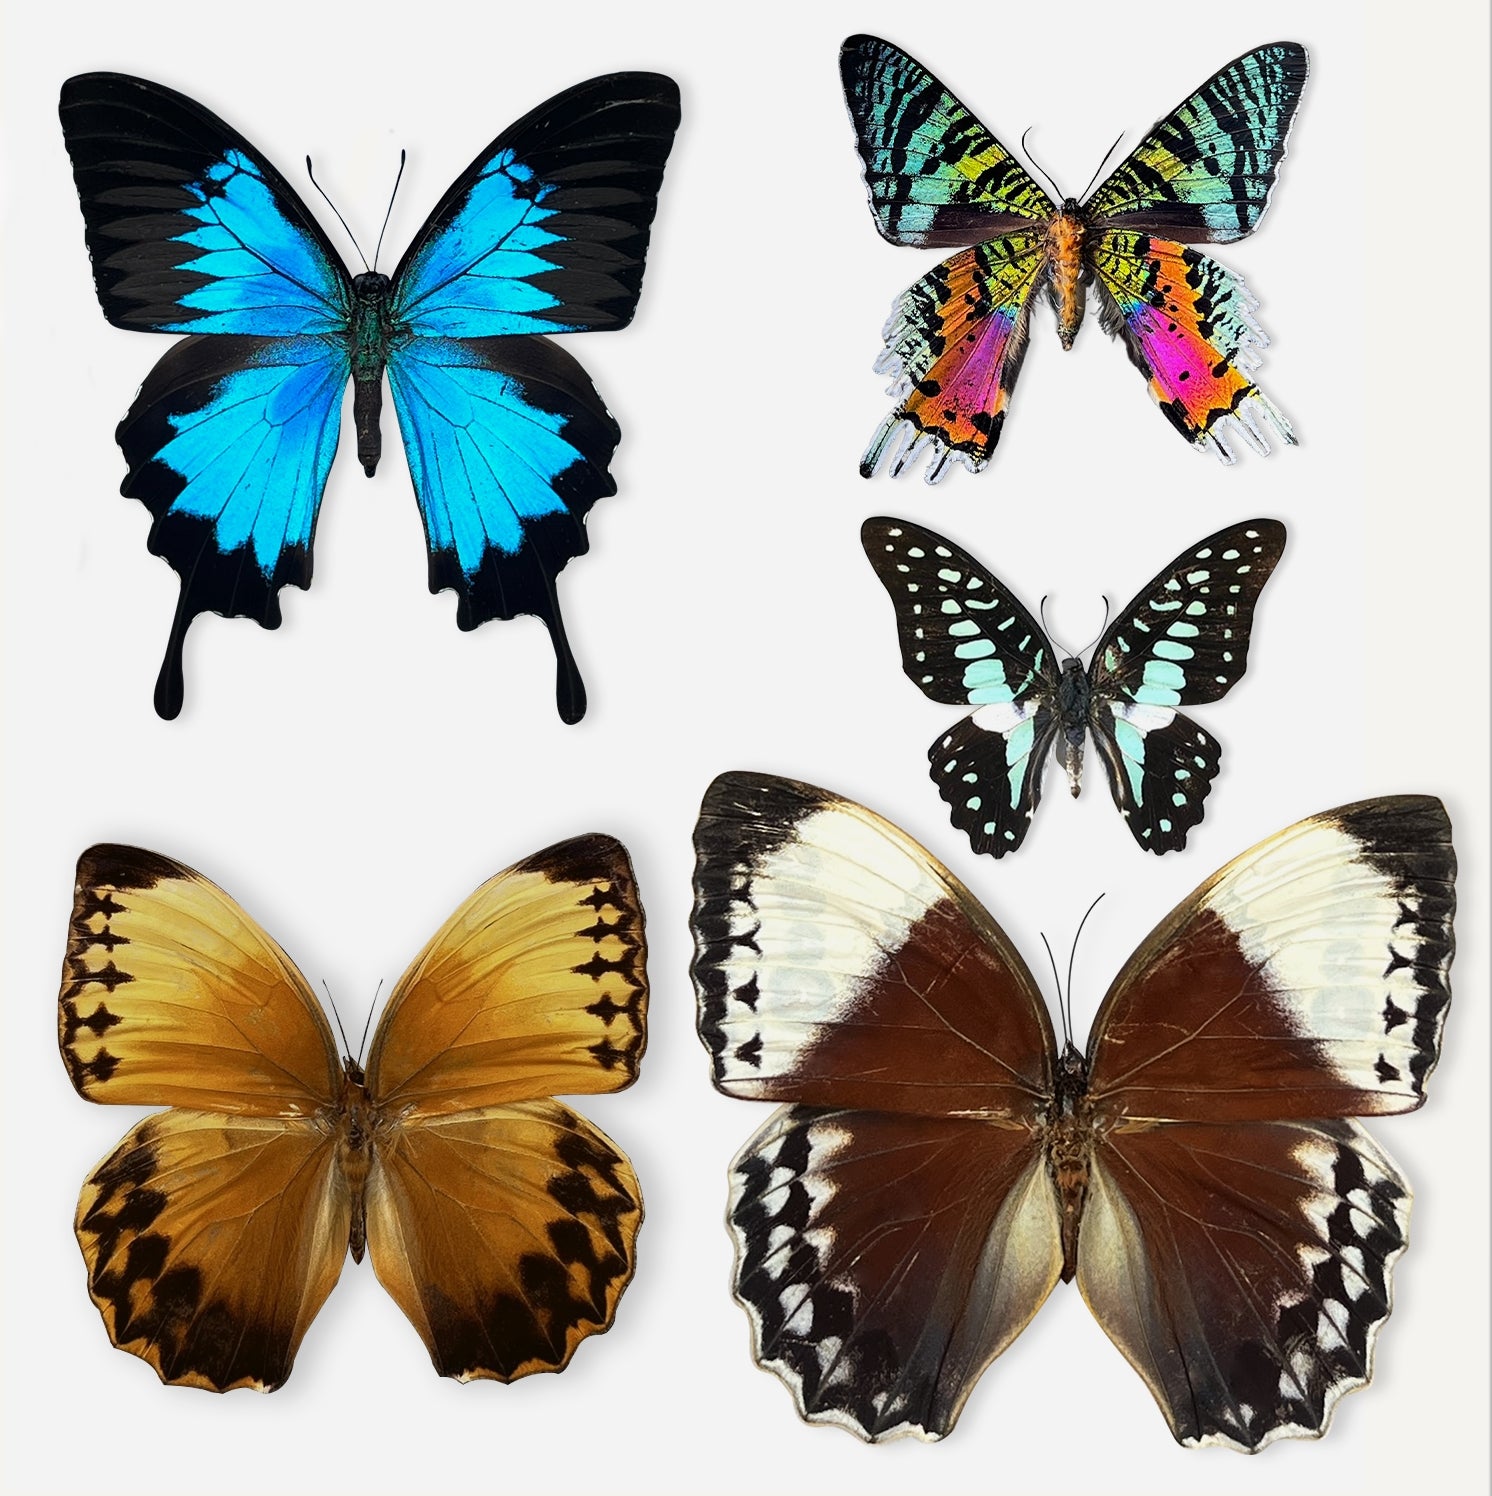 5 Real Butterfly Specimen Collection Butterflies Mounted Dead Animal Preserved Entomology Taxidermy Oddity Scientific Lover Insect Office Desk Art Artwork Display UM-25-A1